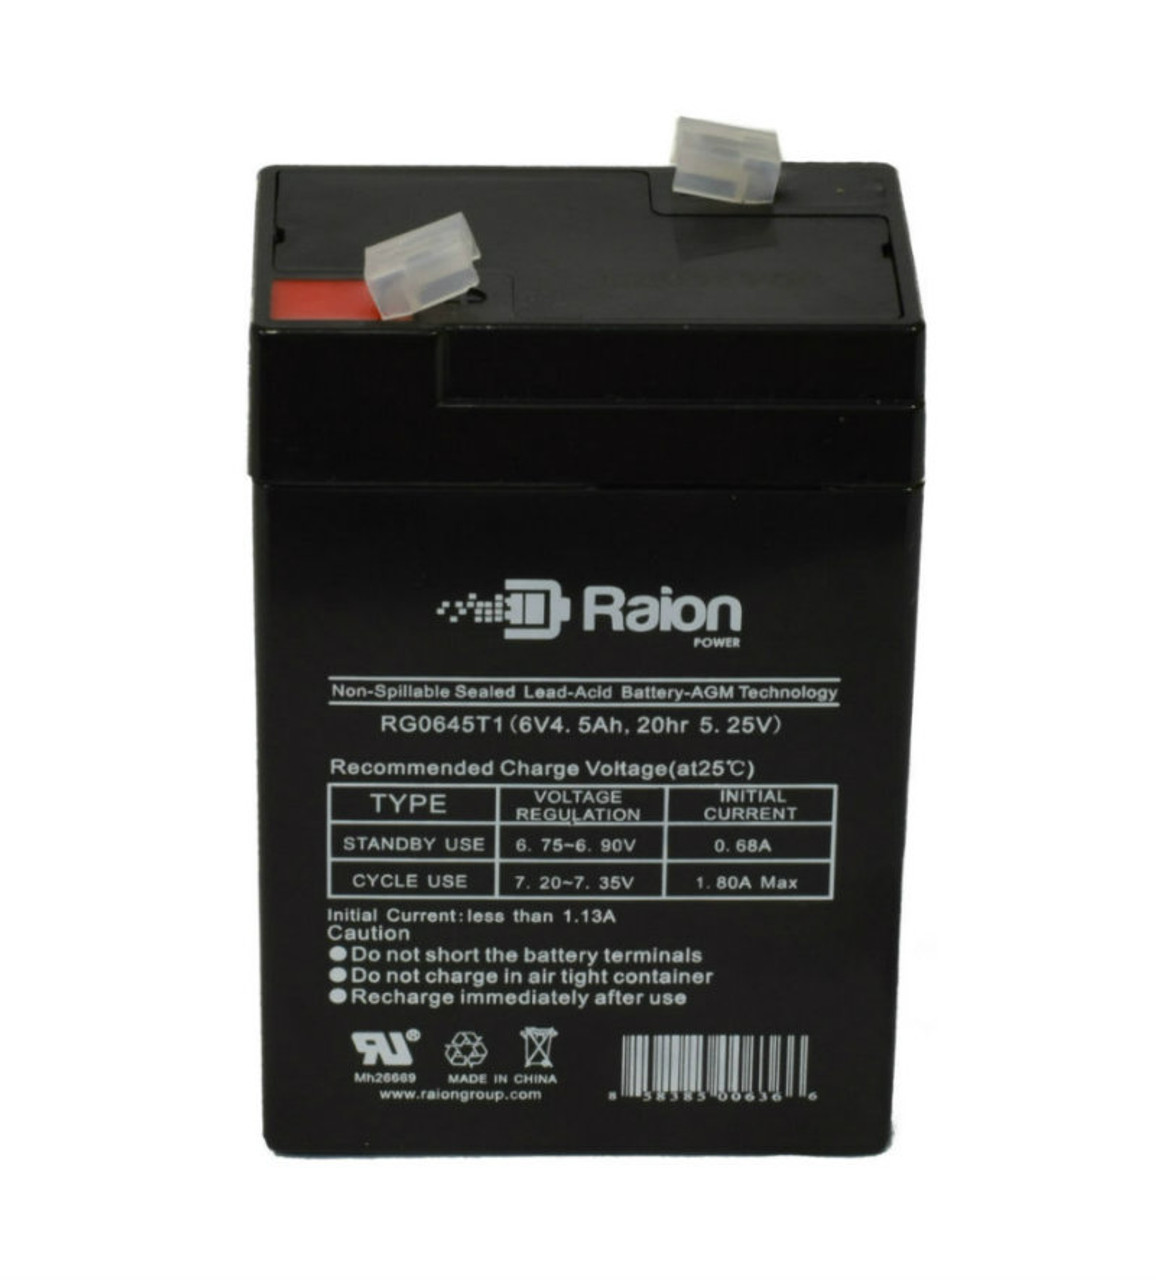 Raion Power RG0645T1 Replacement Battery Cartridge for Cambridge Med Instruments Model 502